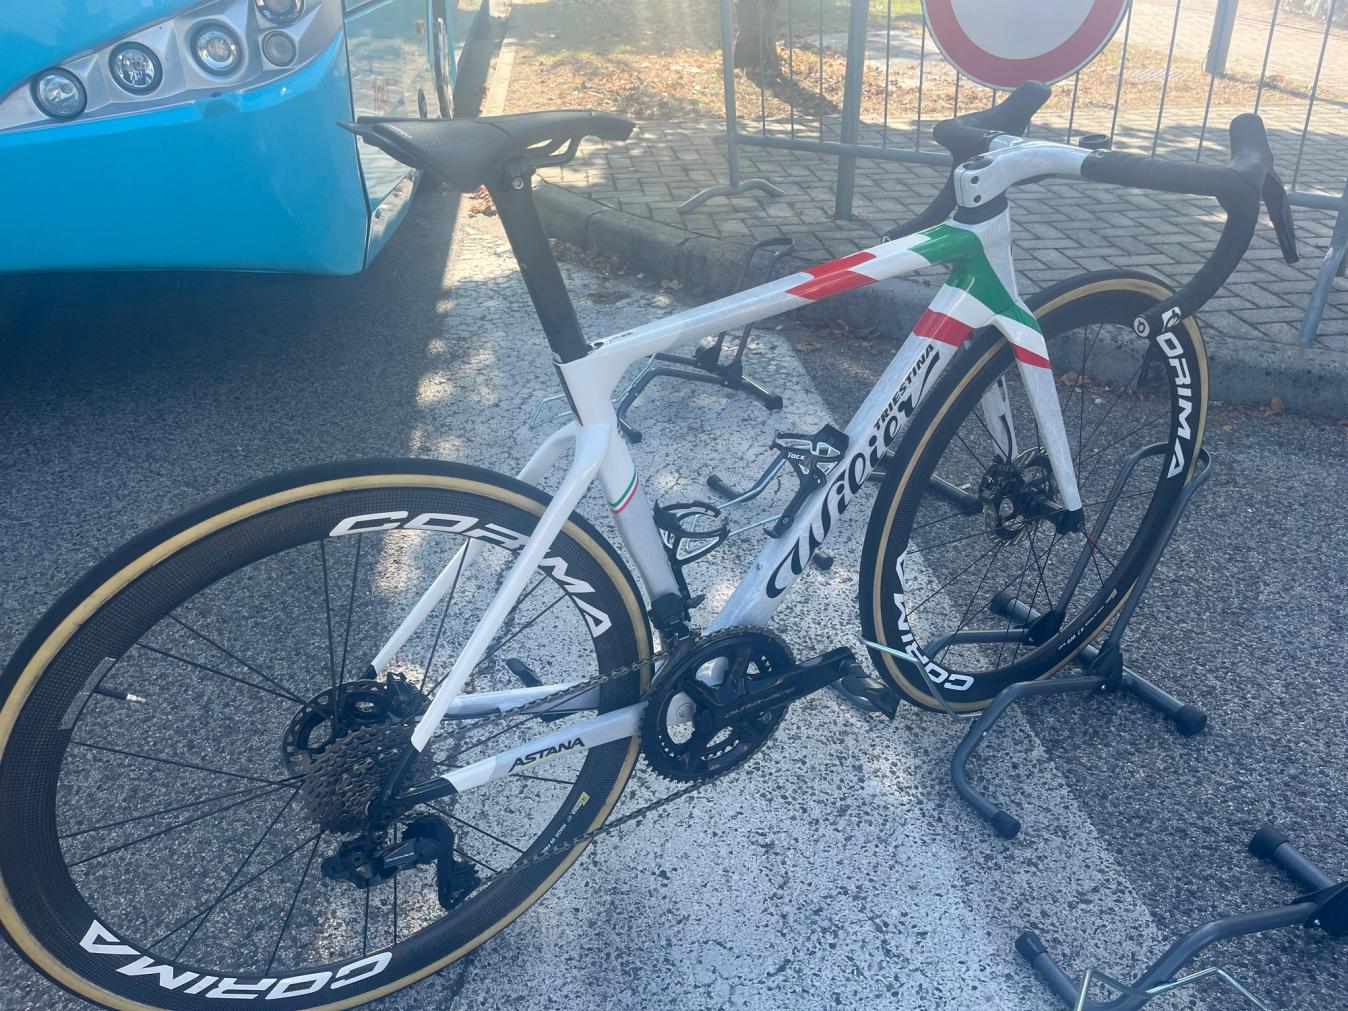 Italian brand Wilier have splashed the Tricolore across the Filante SLR's frame